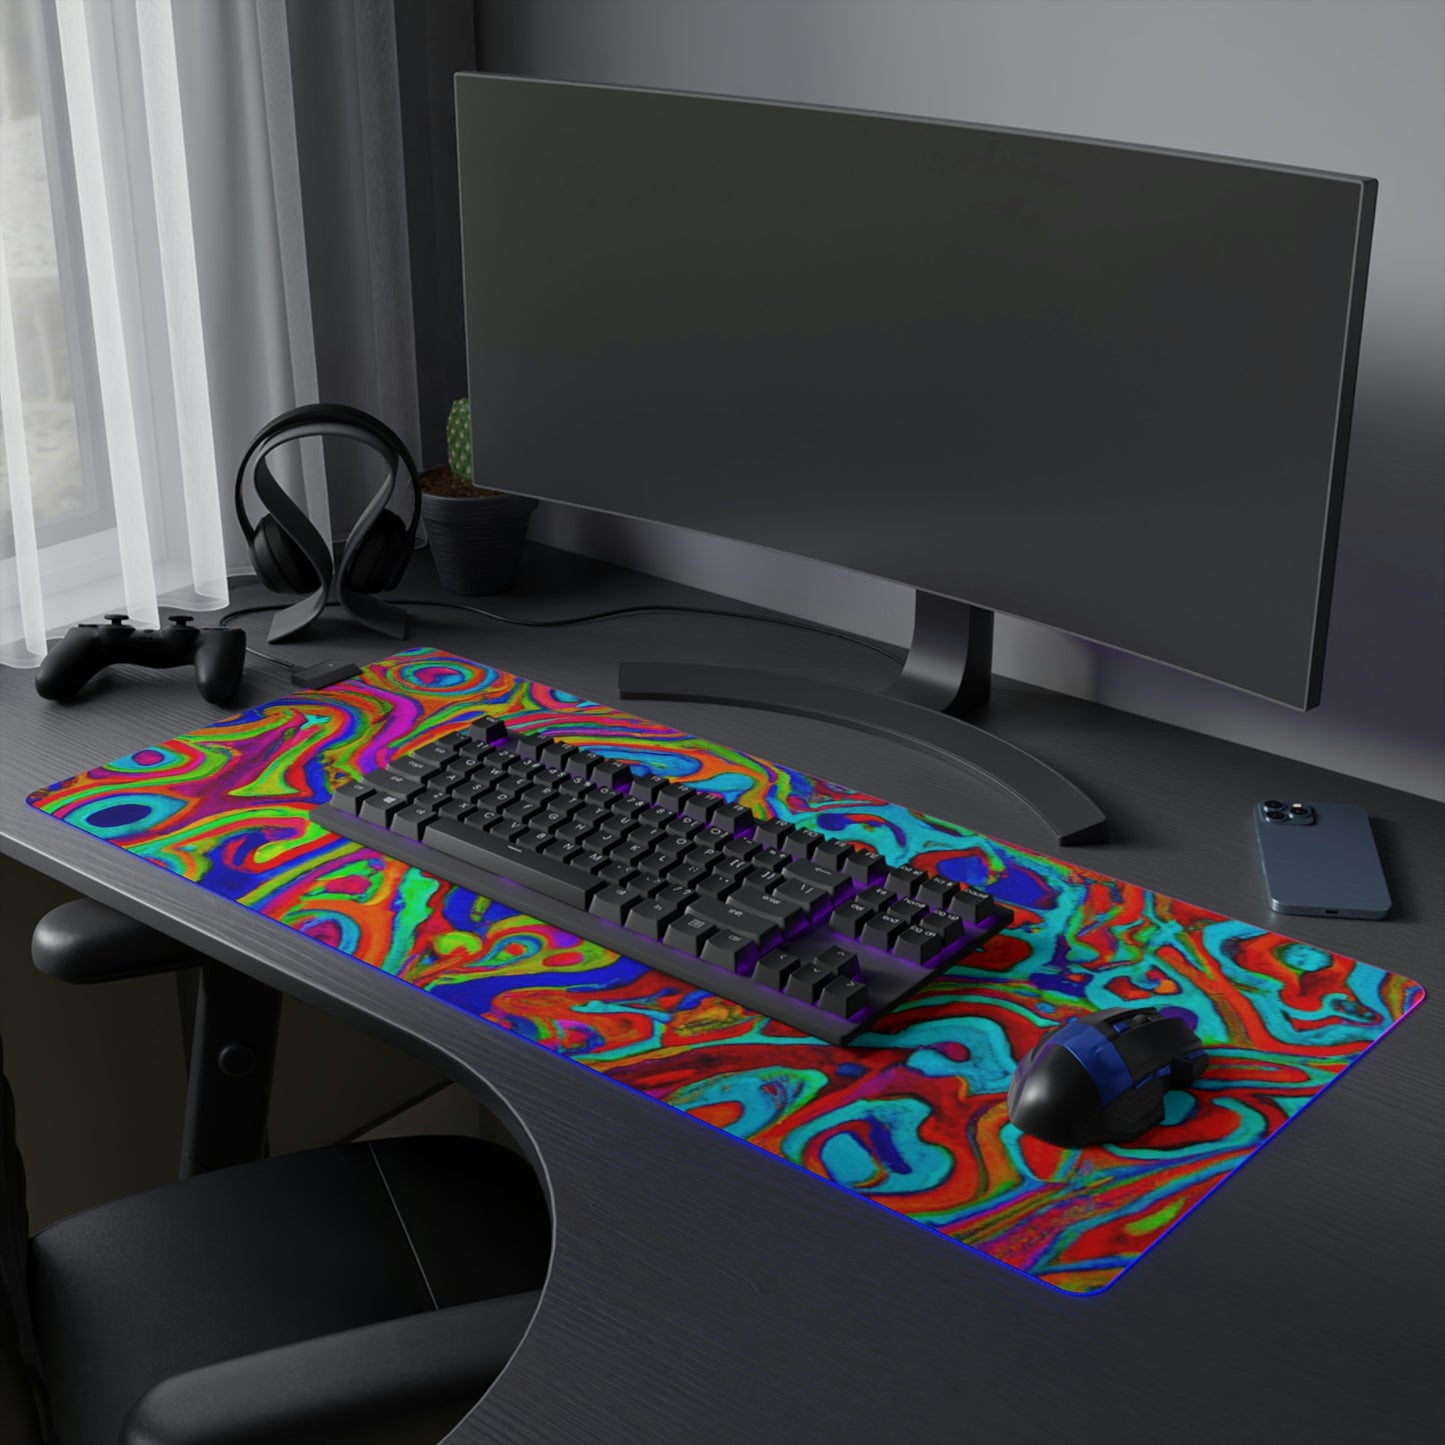 Tommy the Rocketman - Psychedelic Trippy LED Light Up Gaming Mouse Pad